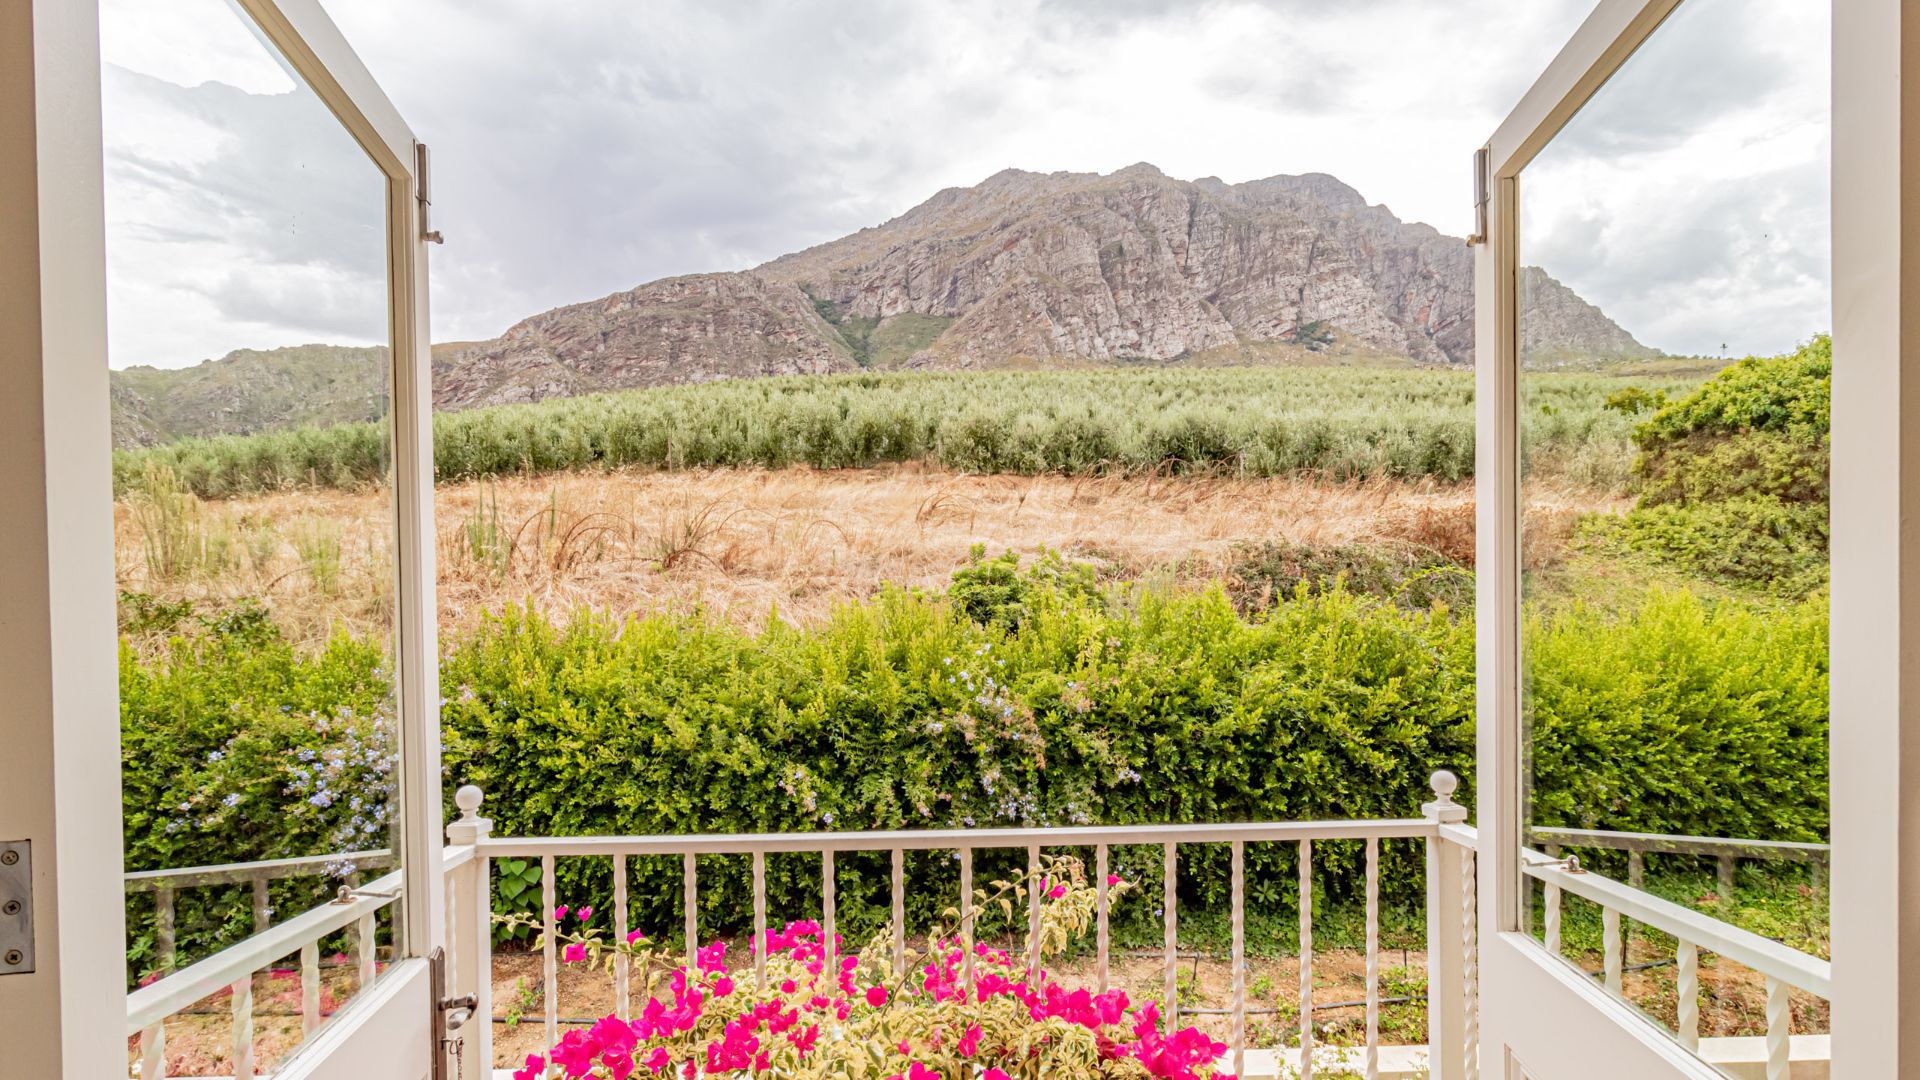 Land in Tulbagh - Image-016.jpg